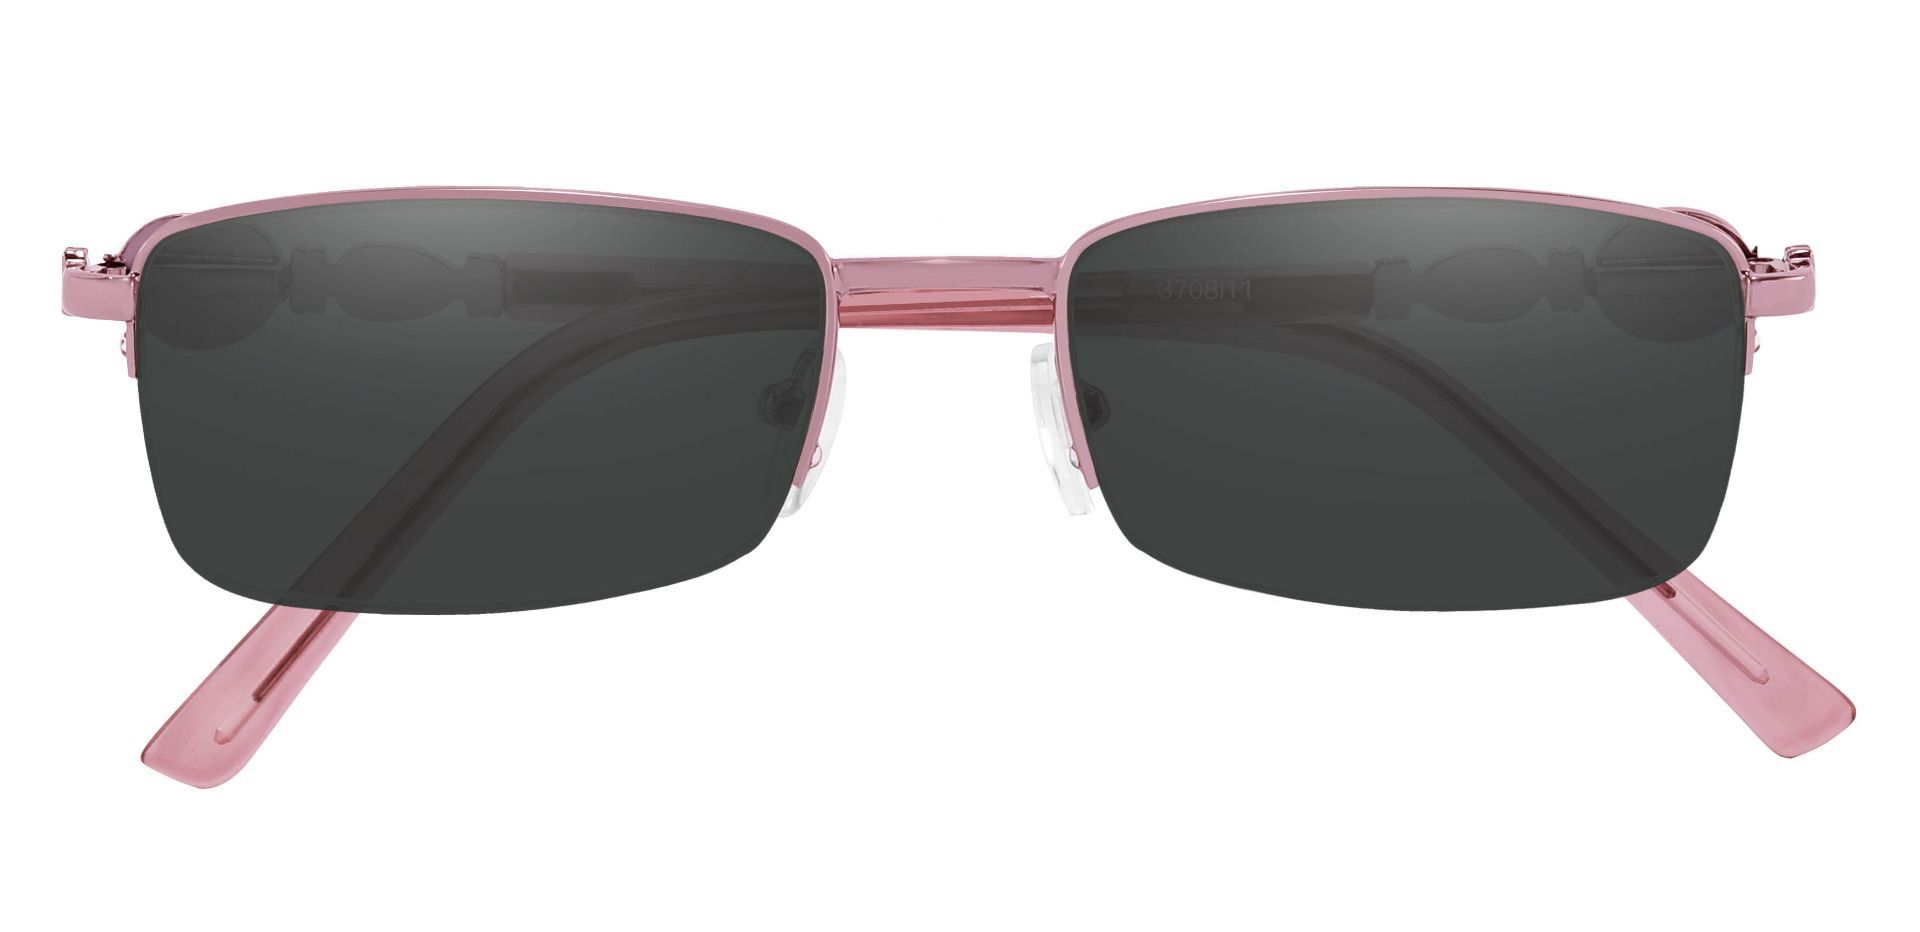 Crowley Rectangle Lined Bifocal Sunglasses - Pink Frame With Gray Lenses